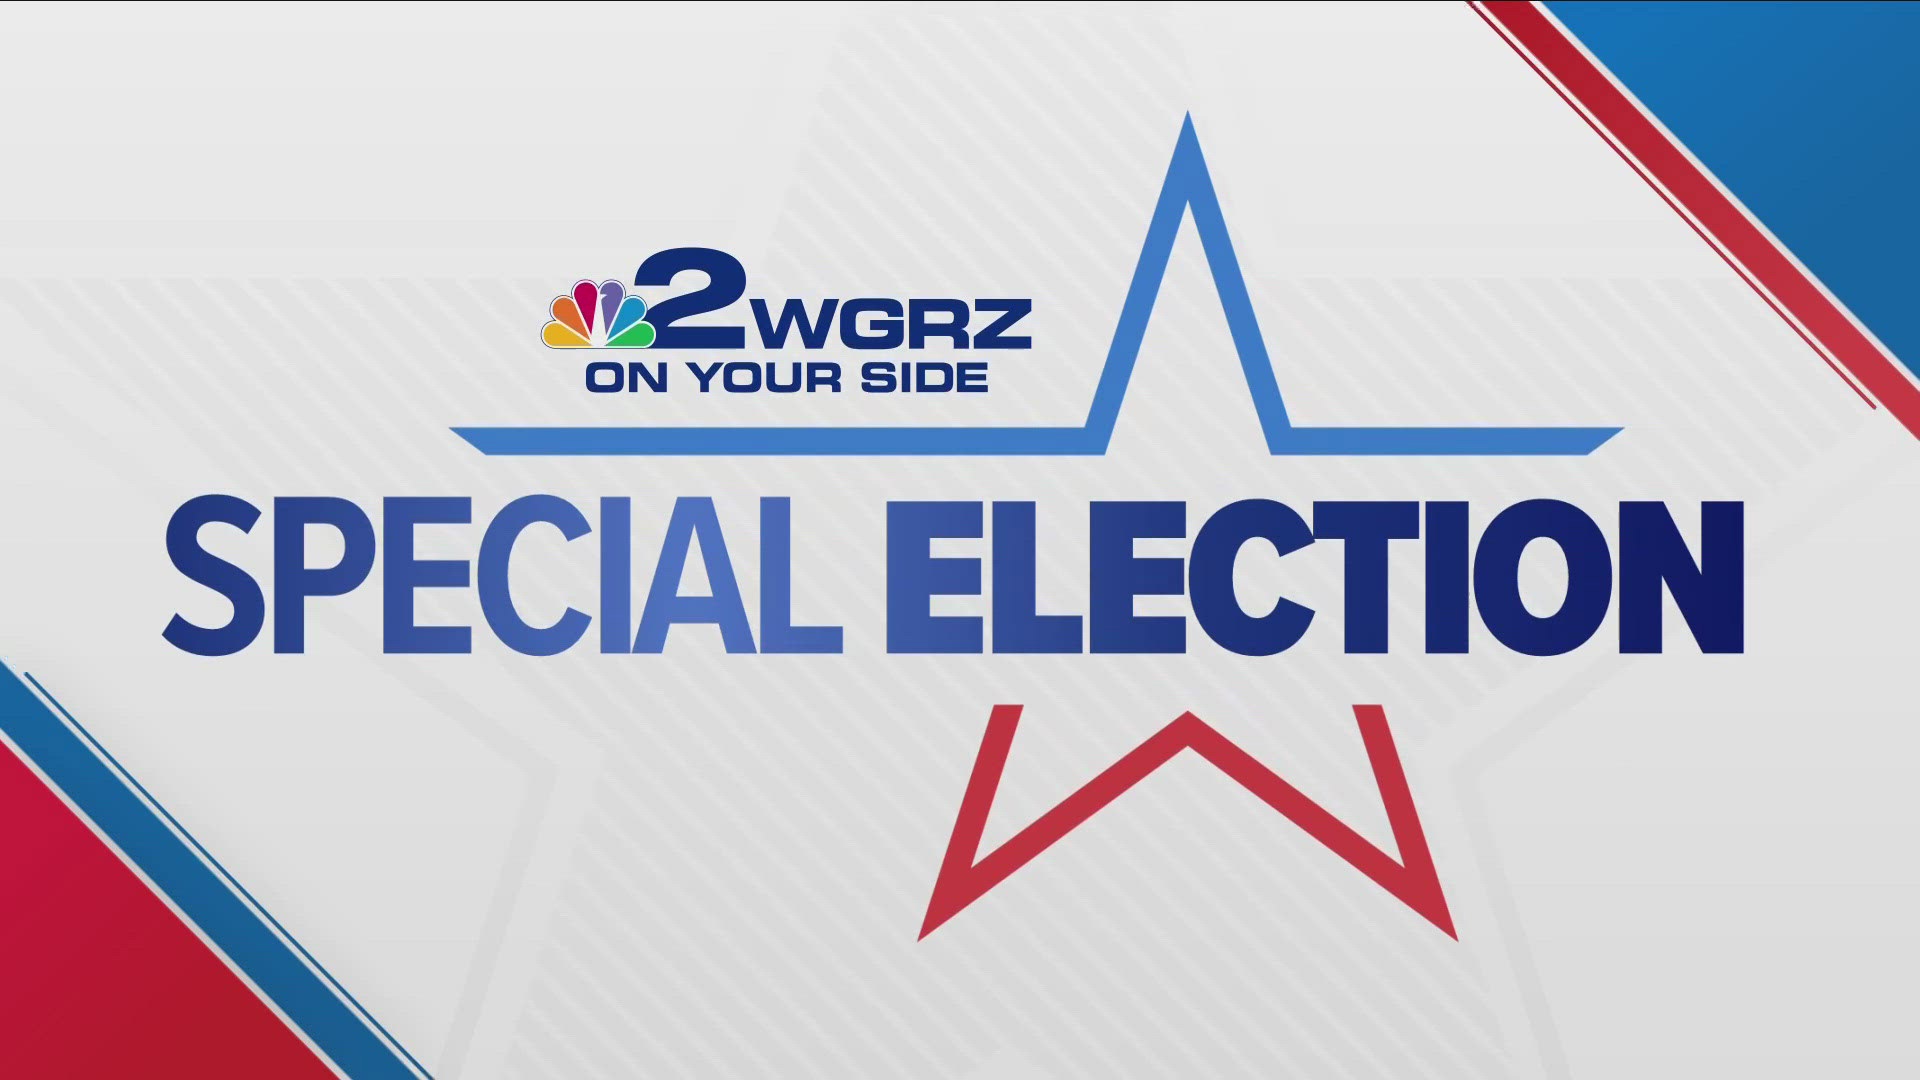 By the early evening, more than 28,000 voters turned out for the 26th Congressional district special election.